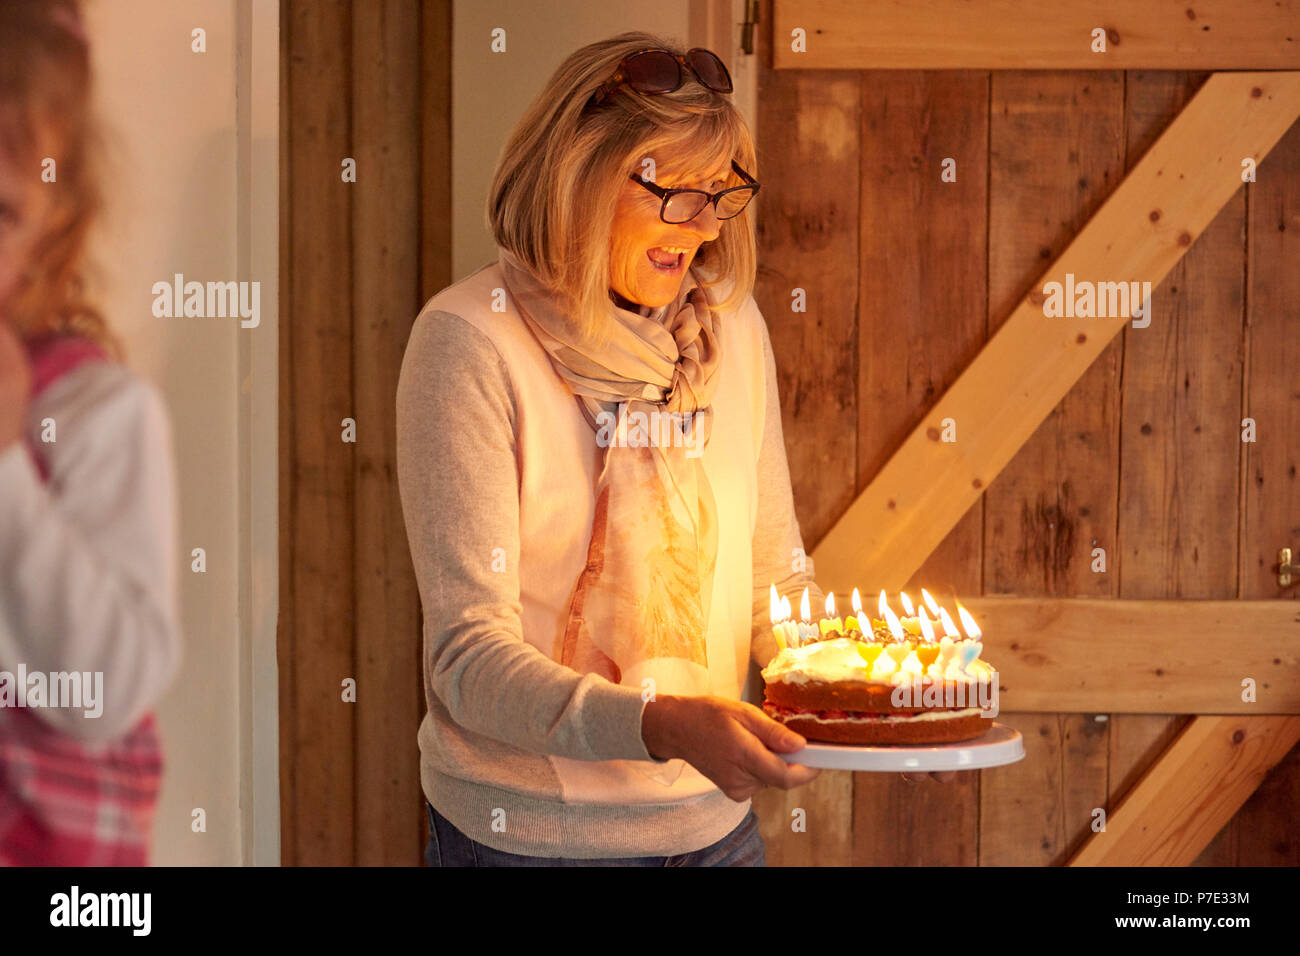 Senior woman carrying birthday cake with lit candles in kitchen Stock Photo